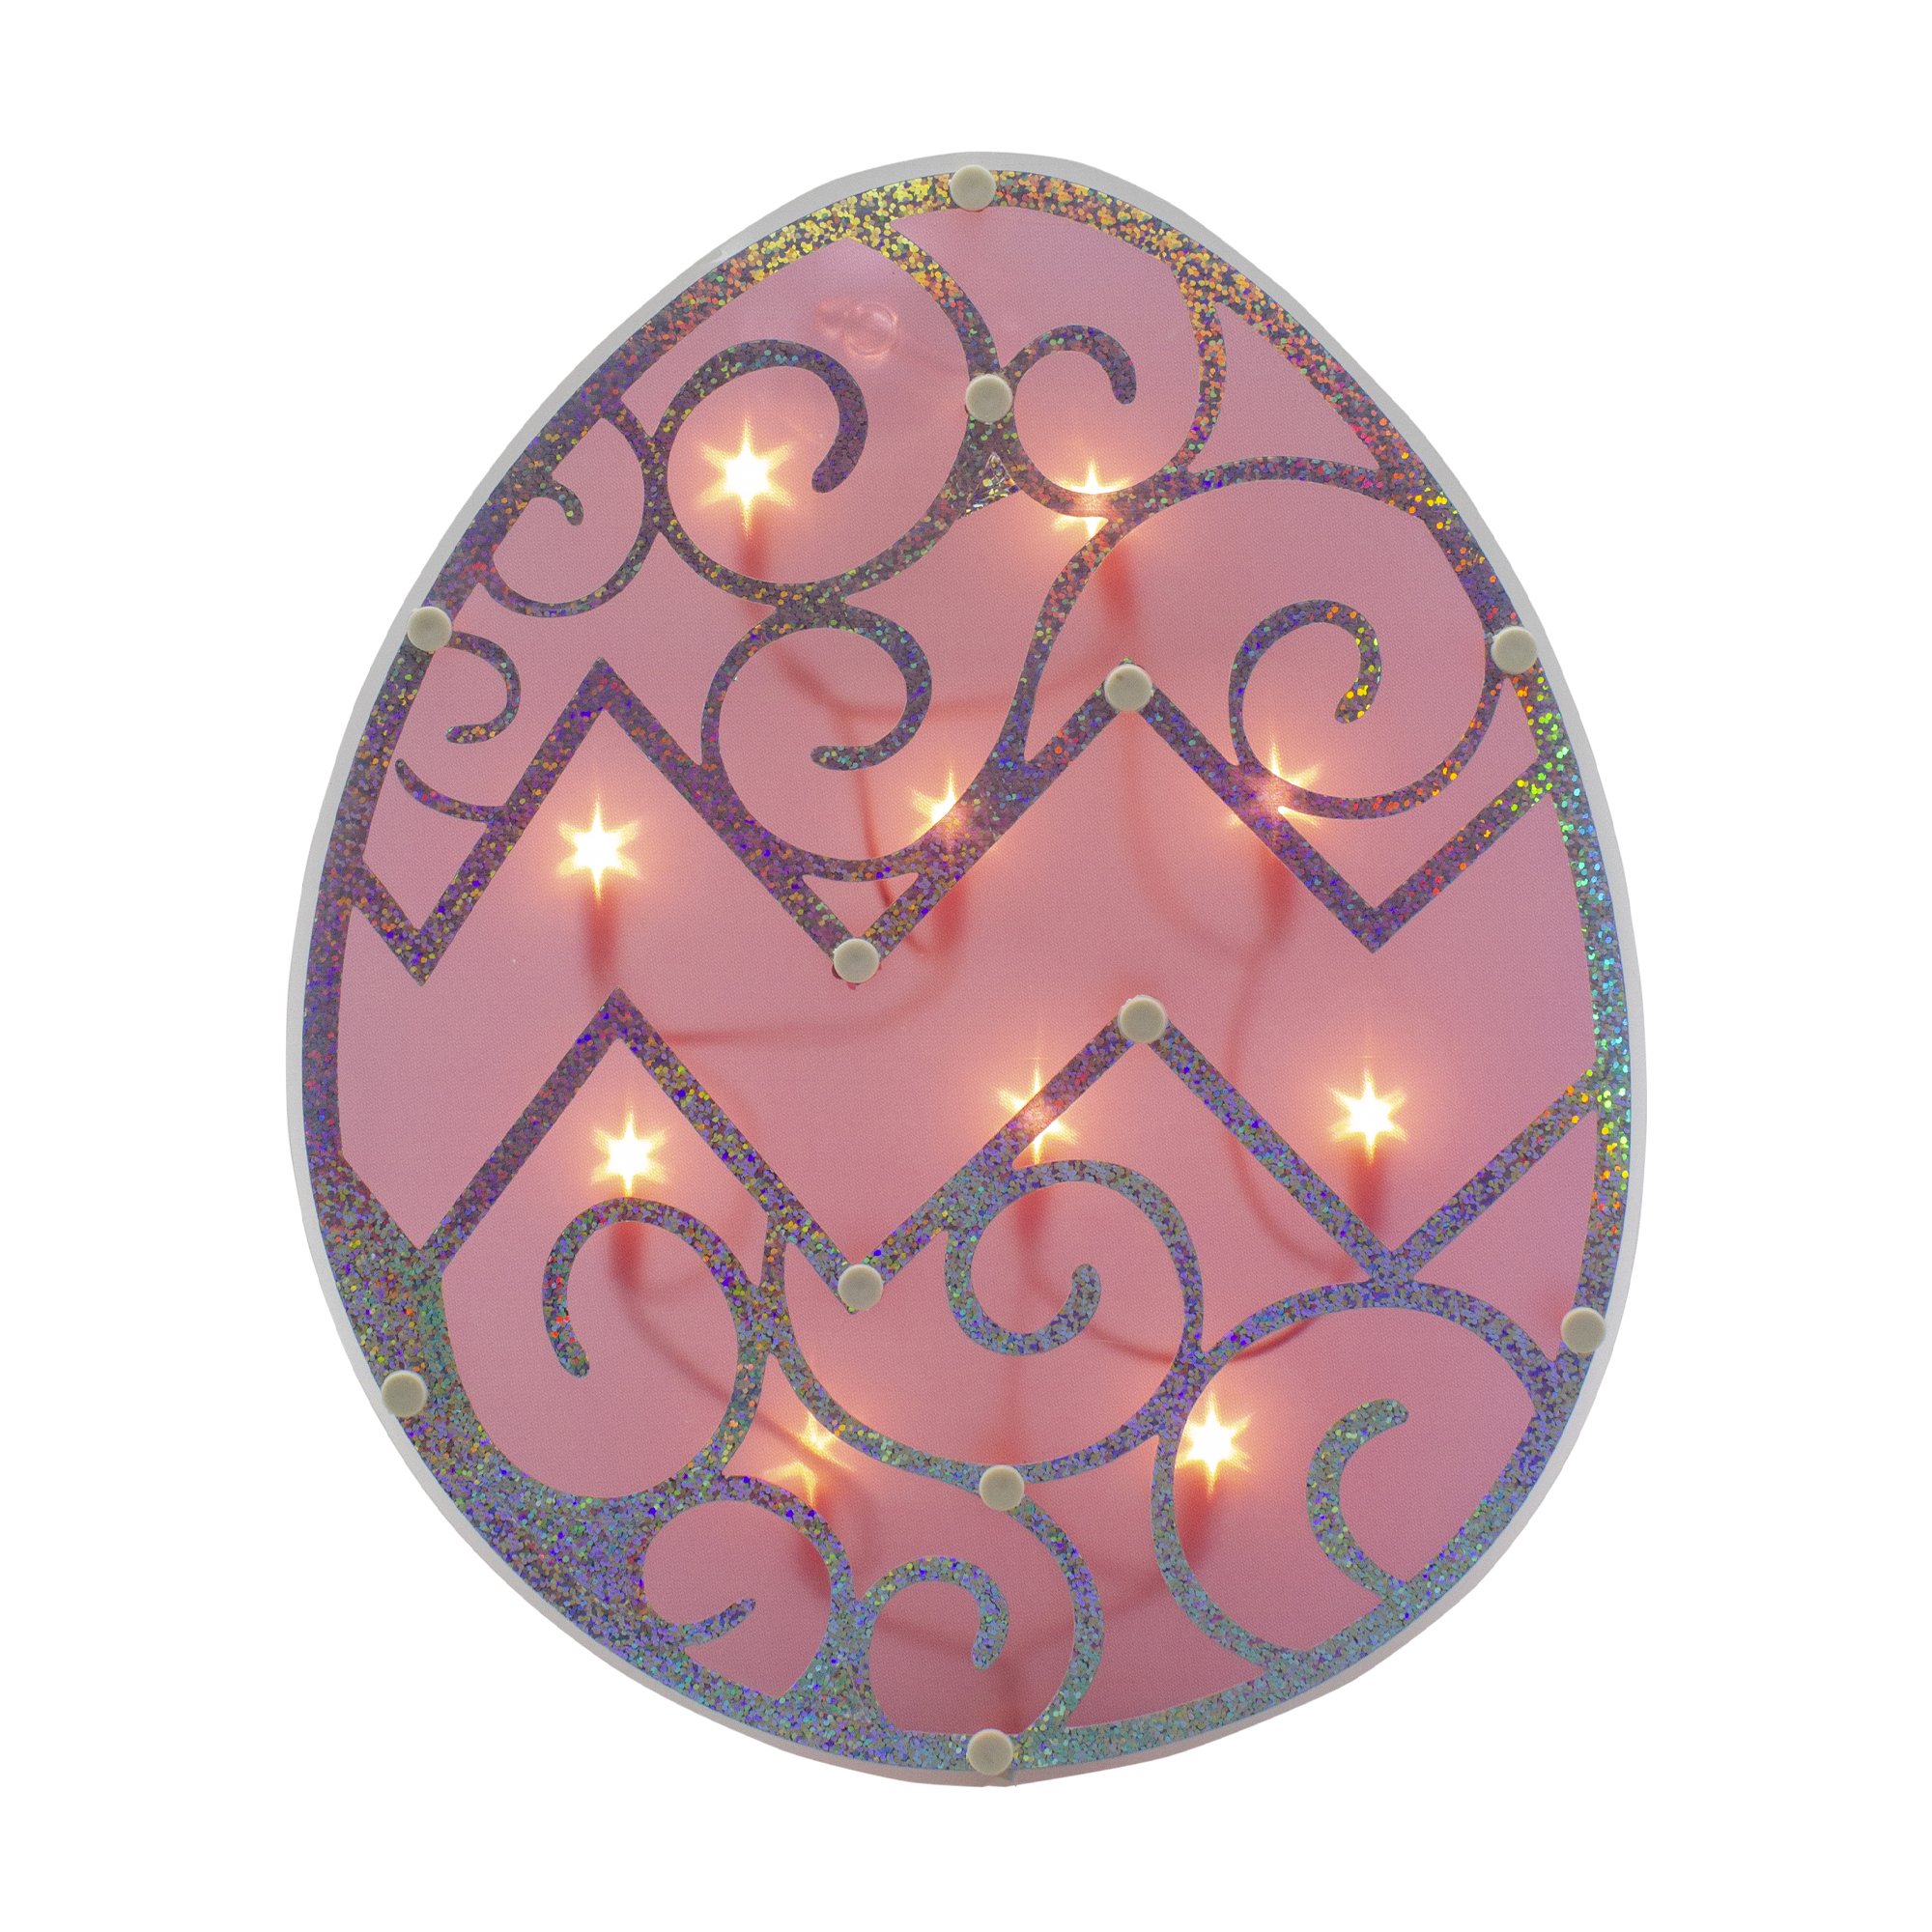 Northlight Lighted Easter Egg Window Silhouette Decoration - 12" - Pink